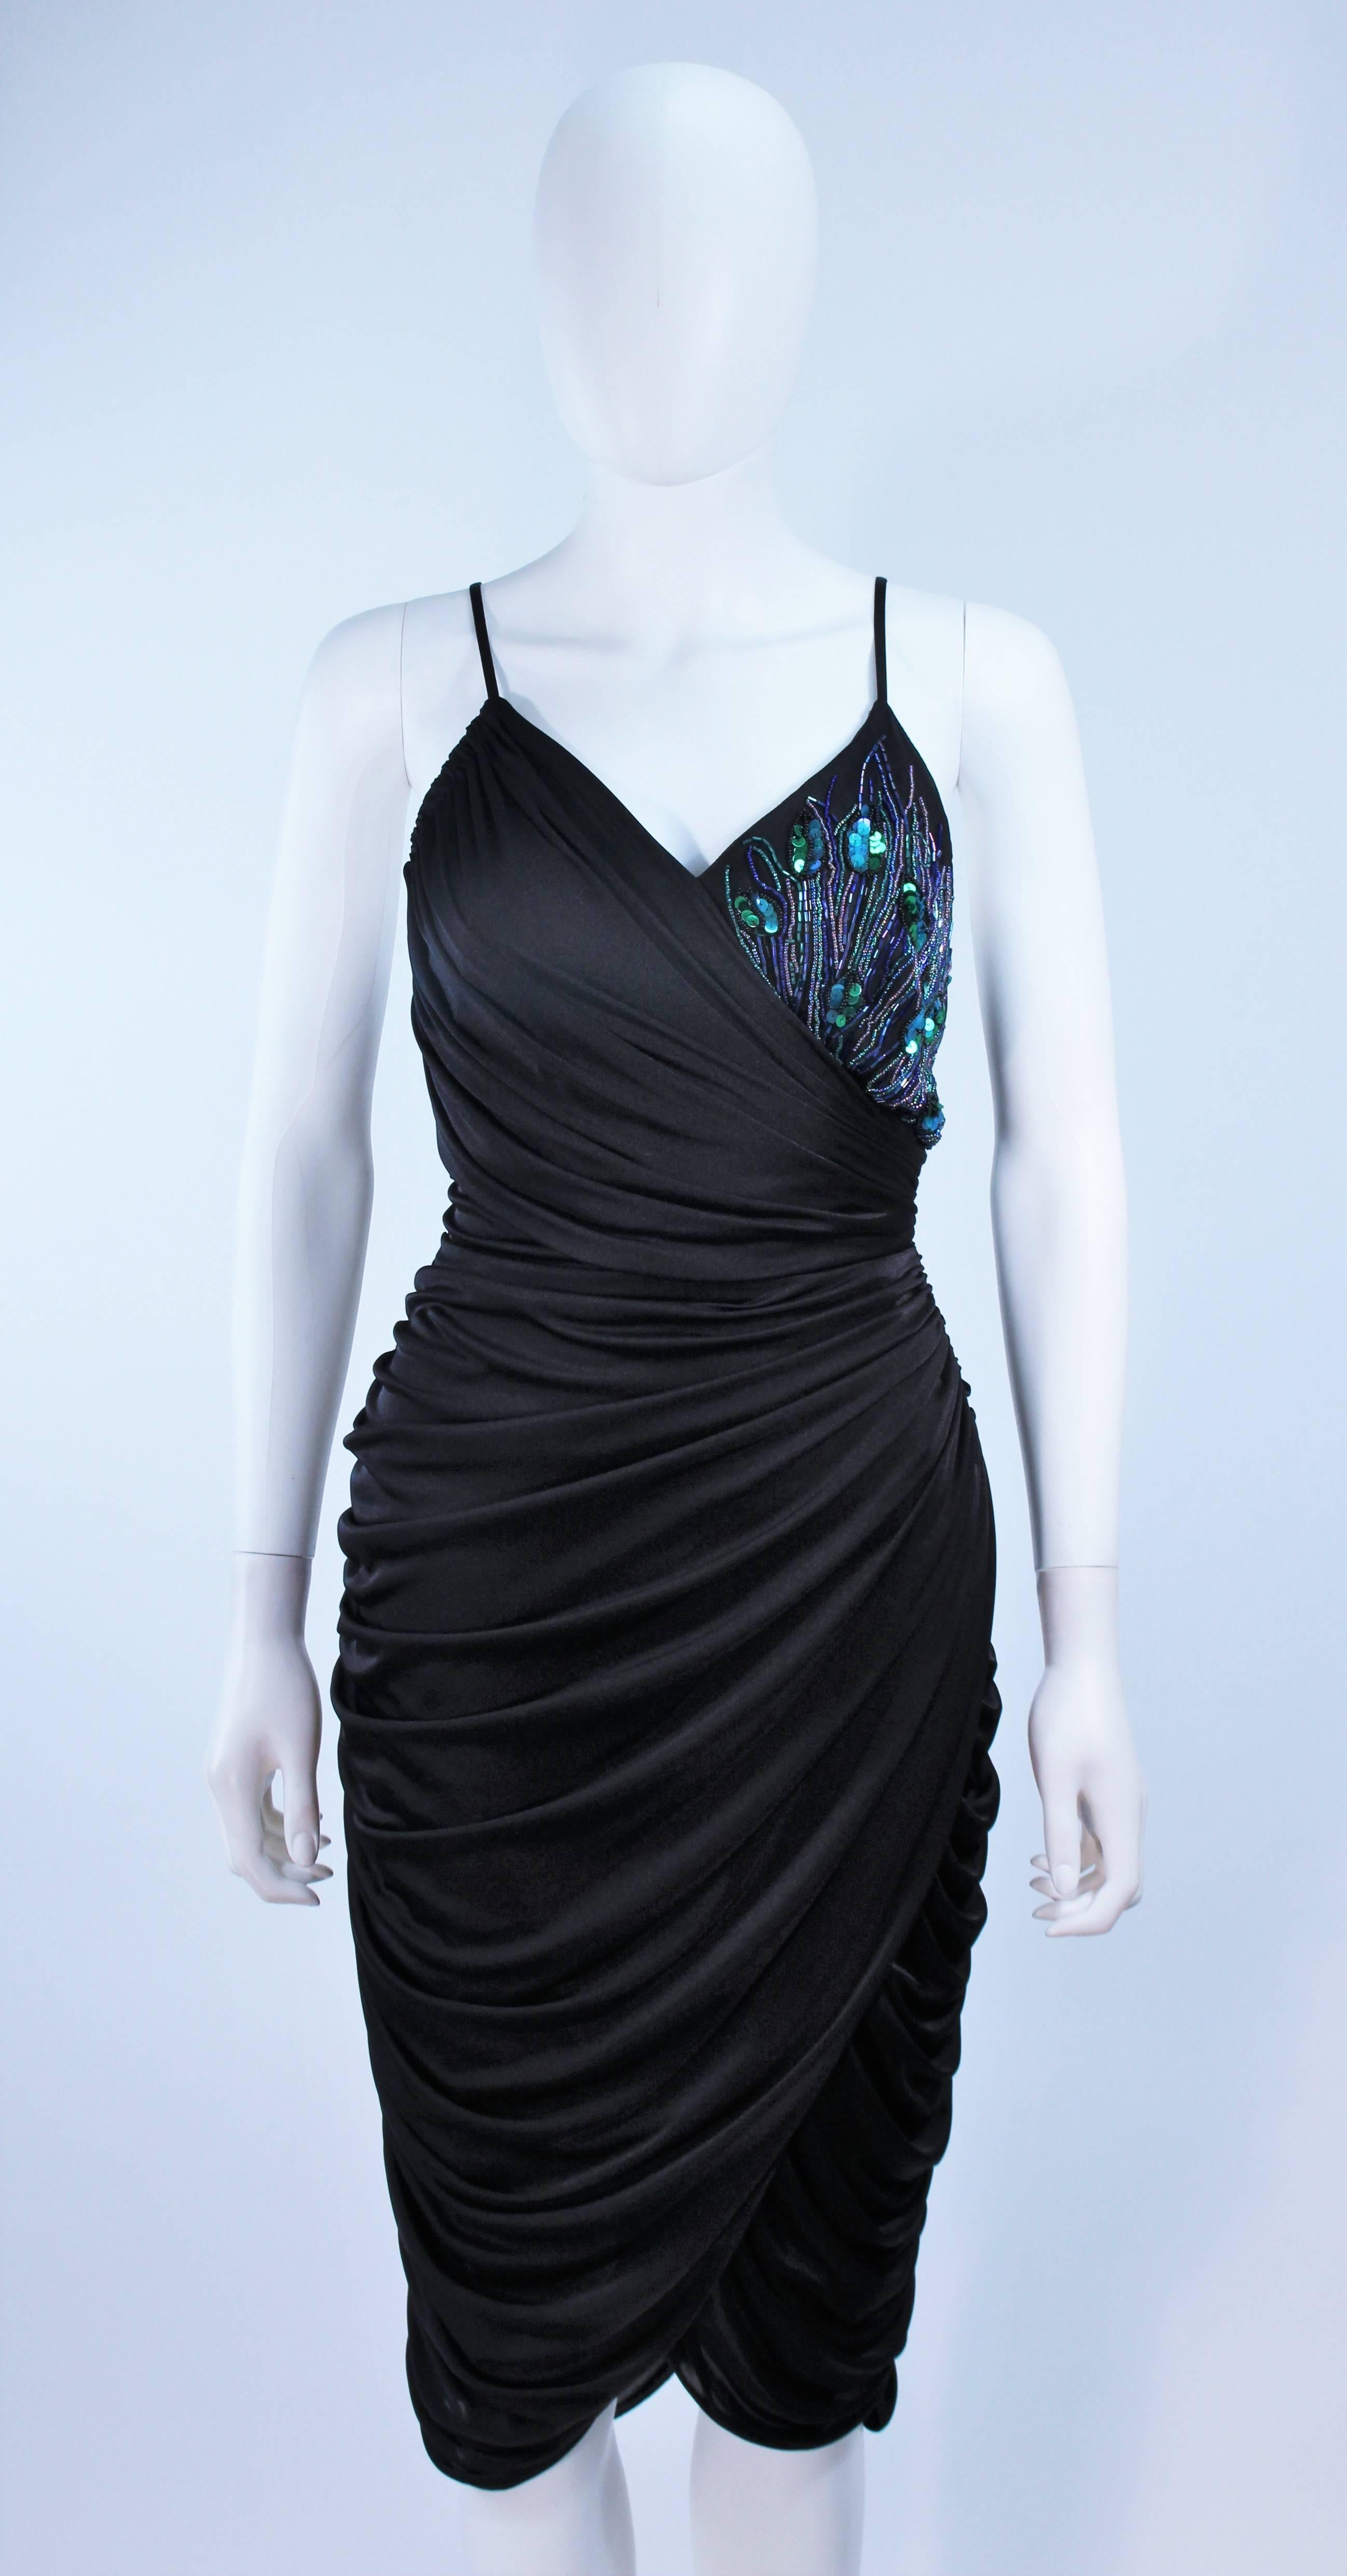 ABBEY KENT Black Draped Jersey Cocktail Dress with Iridescent Sequin Applique 10 In Excellent Condition For Sale In Los Angeles, CA